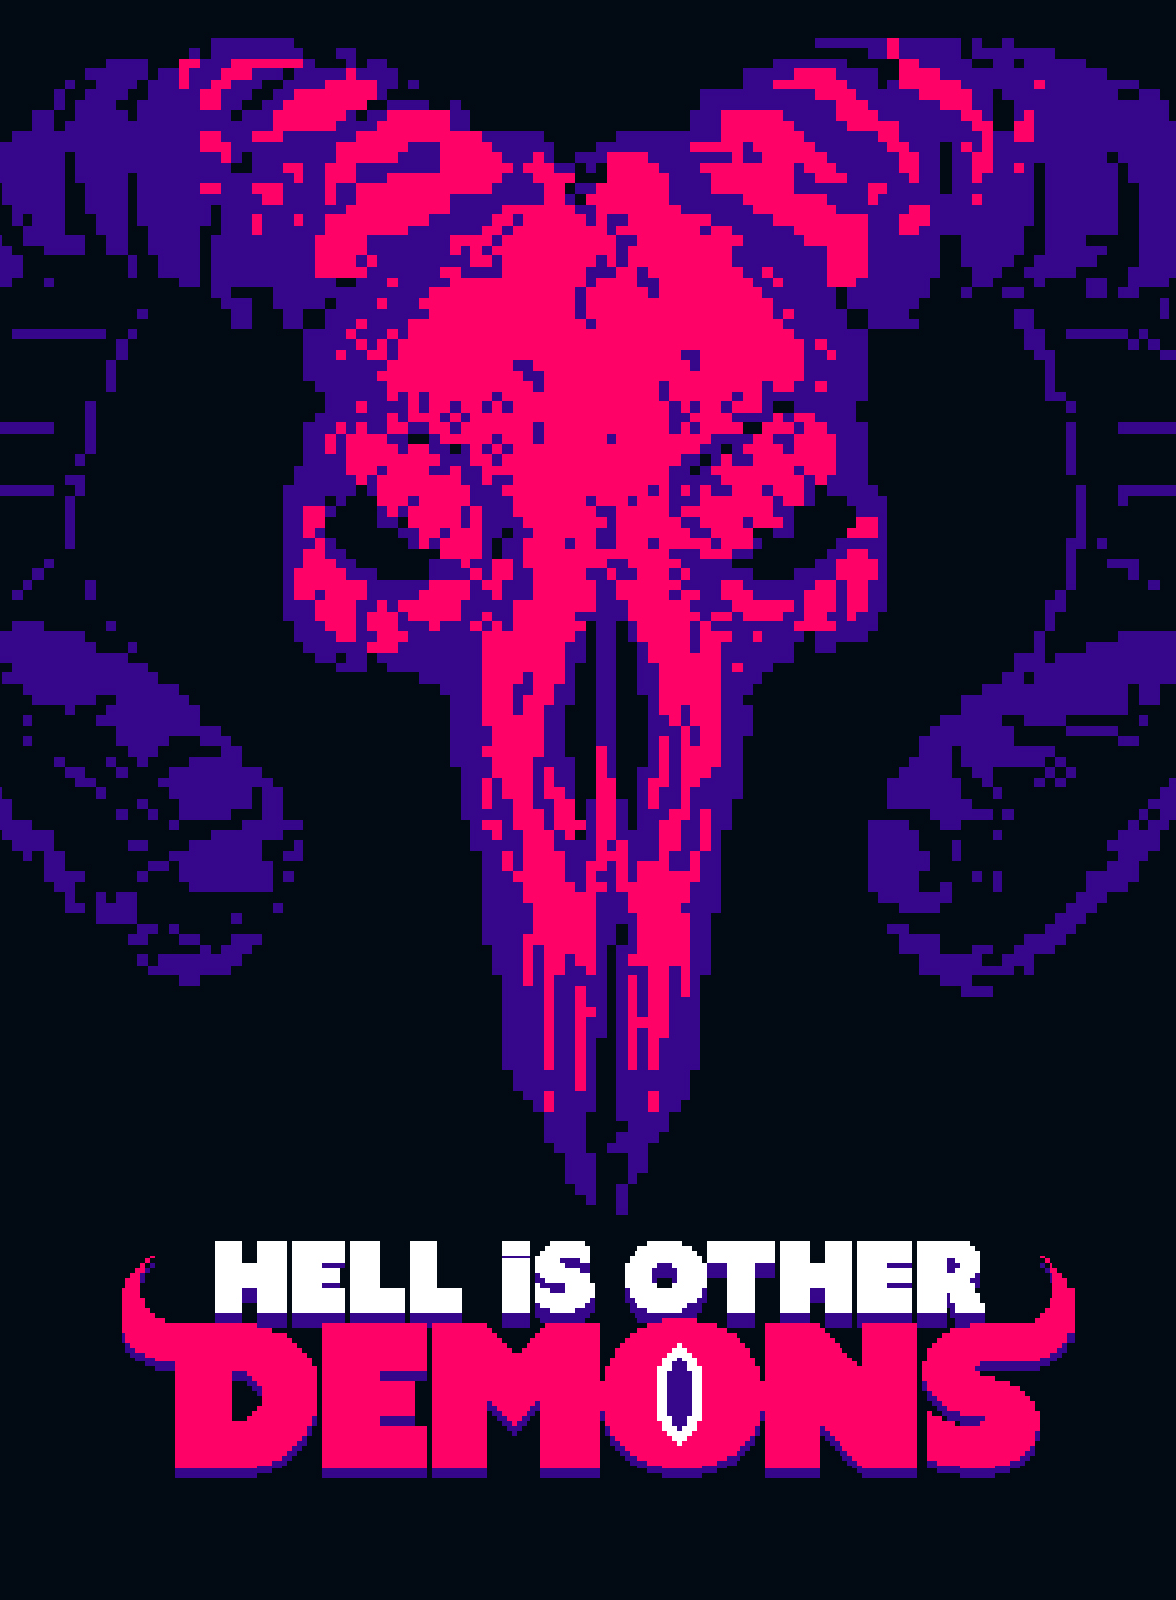 Hell is Others download the new version for windows